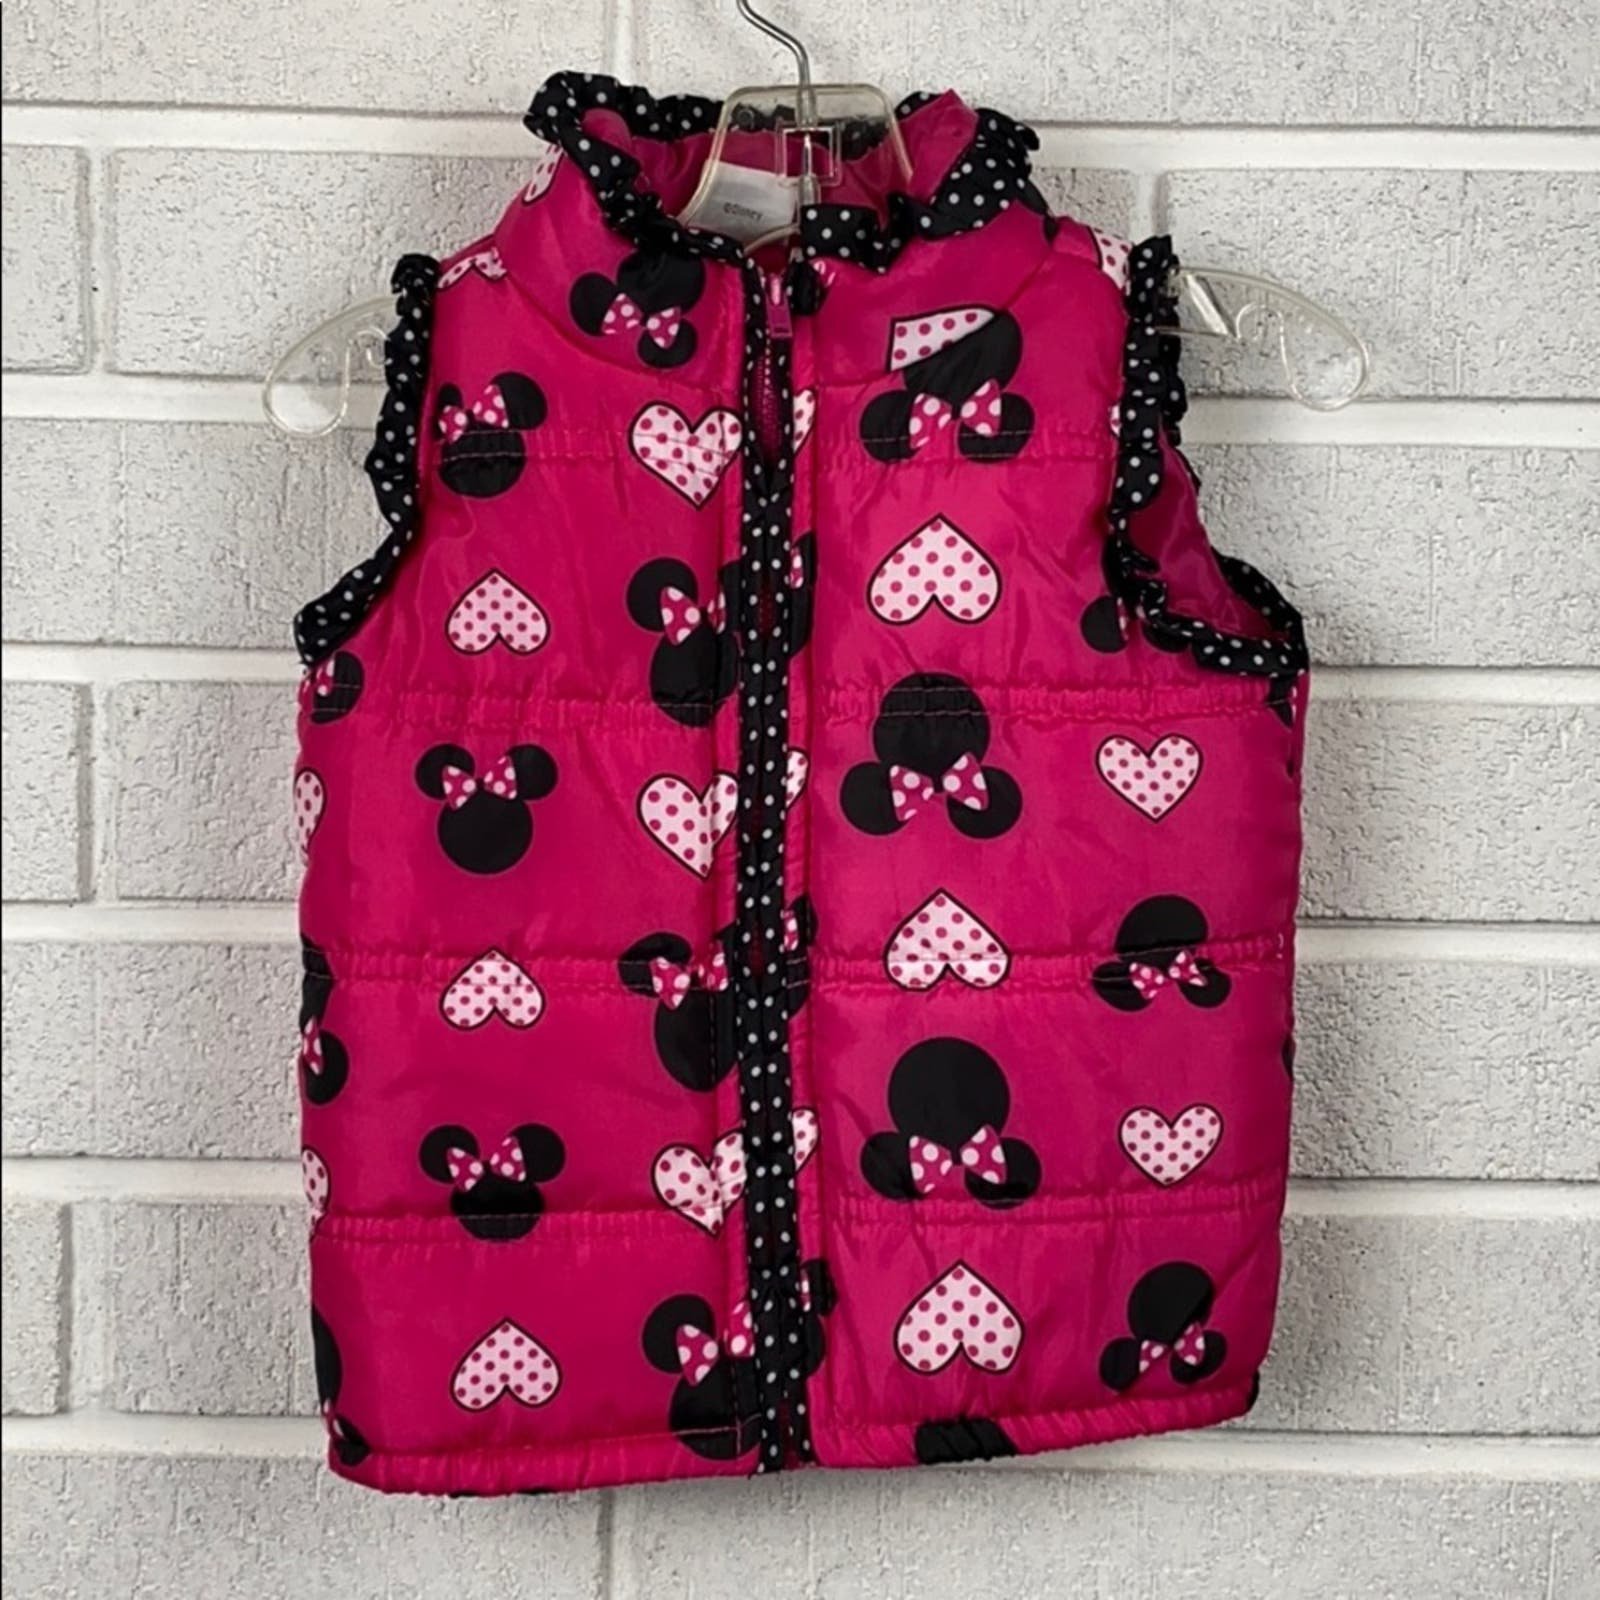 Disney Toddler Girl´s Pink & Black Print Minnie Mouse Puffer Vest Size 2 T-3 T bA05d5mG2